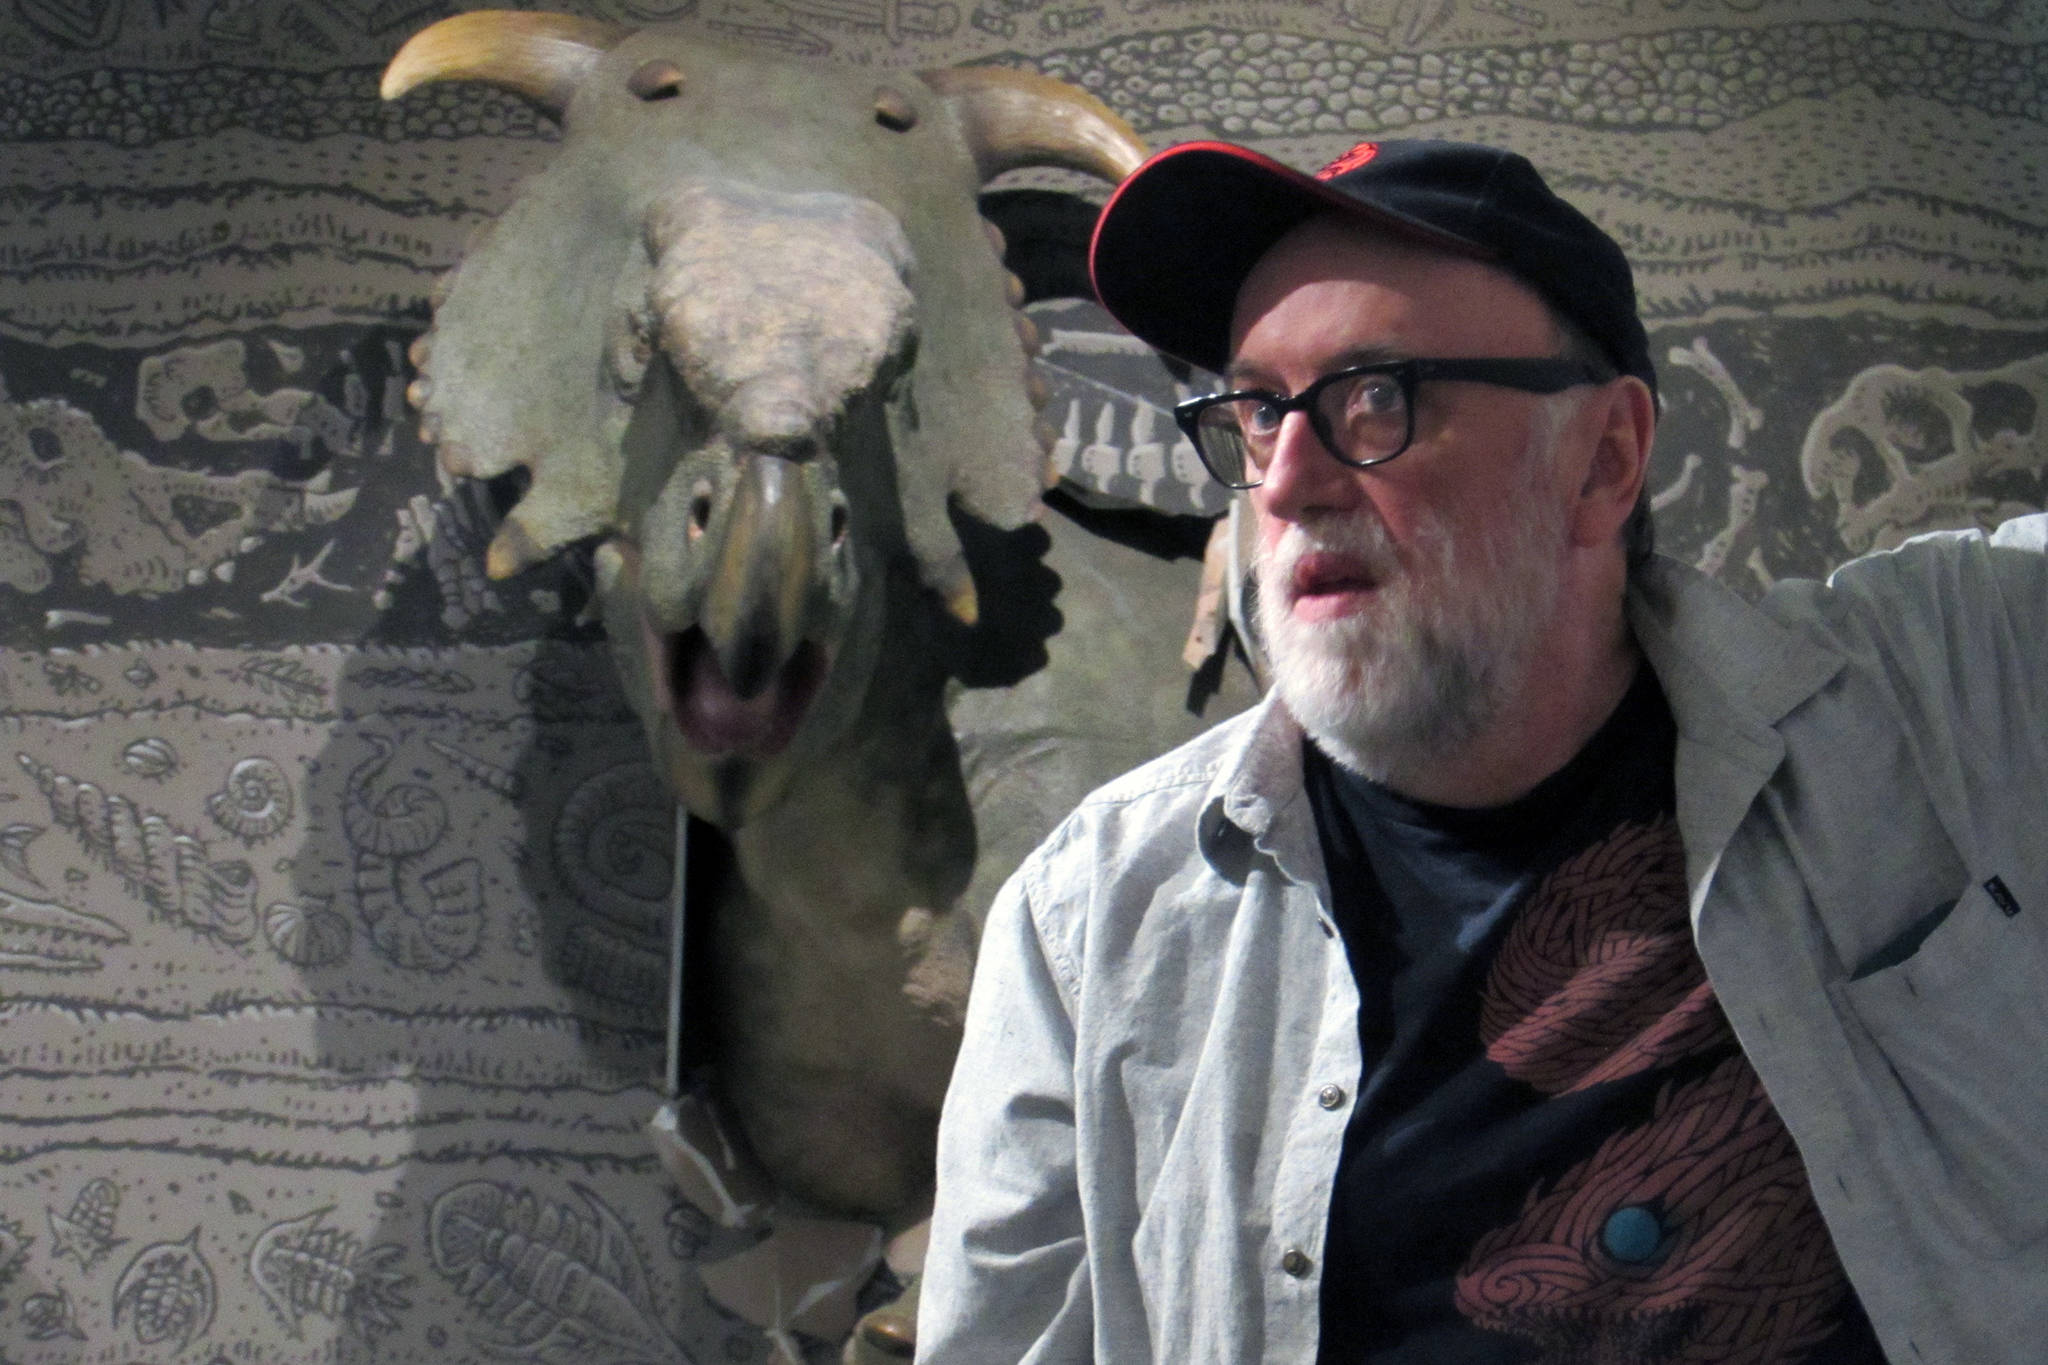 Ray Troll speaks in front of a statue of a pachyrhinosaurus made by Gary Staab on Thursday, May 2, 2019. The statue is part of the “Cruisin’ the Fossil Coastline” exhibition at the Alaska State Museum. (Ben Hohenstatt | Juneau Empire)